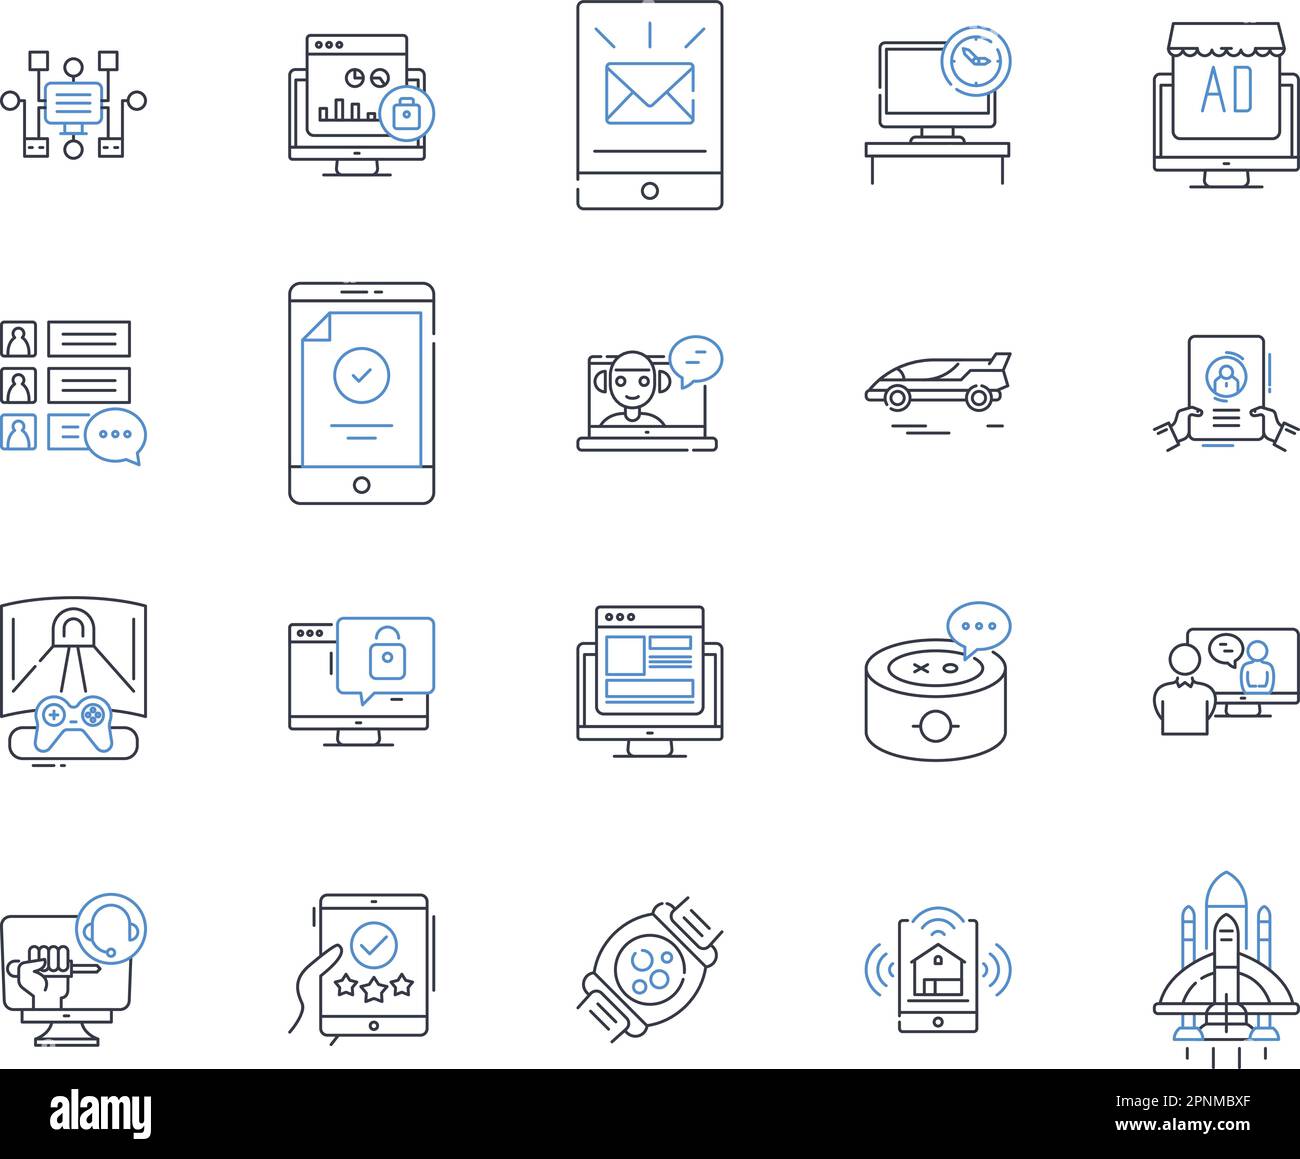 Big data line icons collection. Analytics, Volume, Velocity, Variety, Insights, Predictive, Optimization vector and linear illustration. Visualization Stock Vector